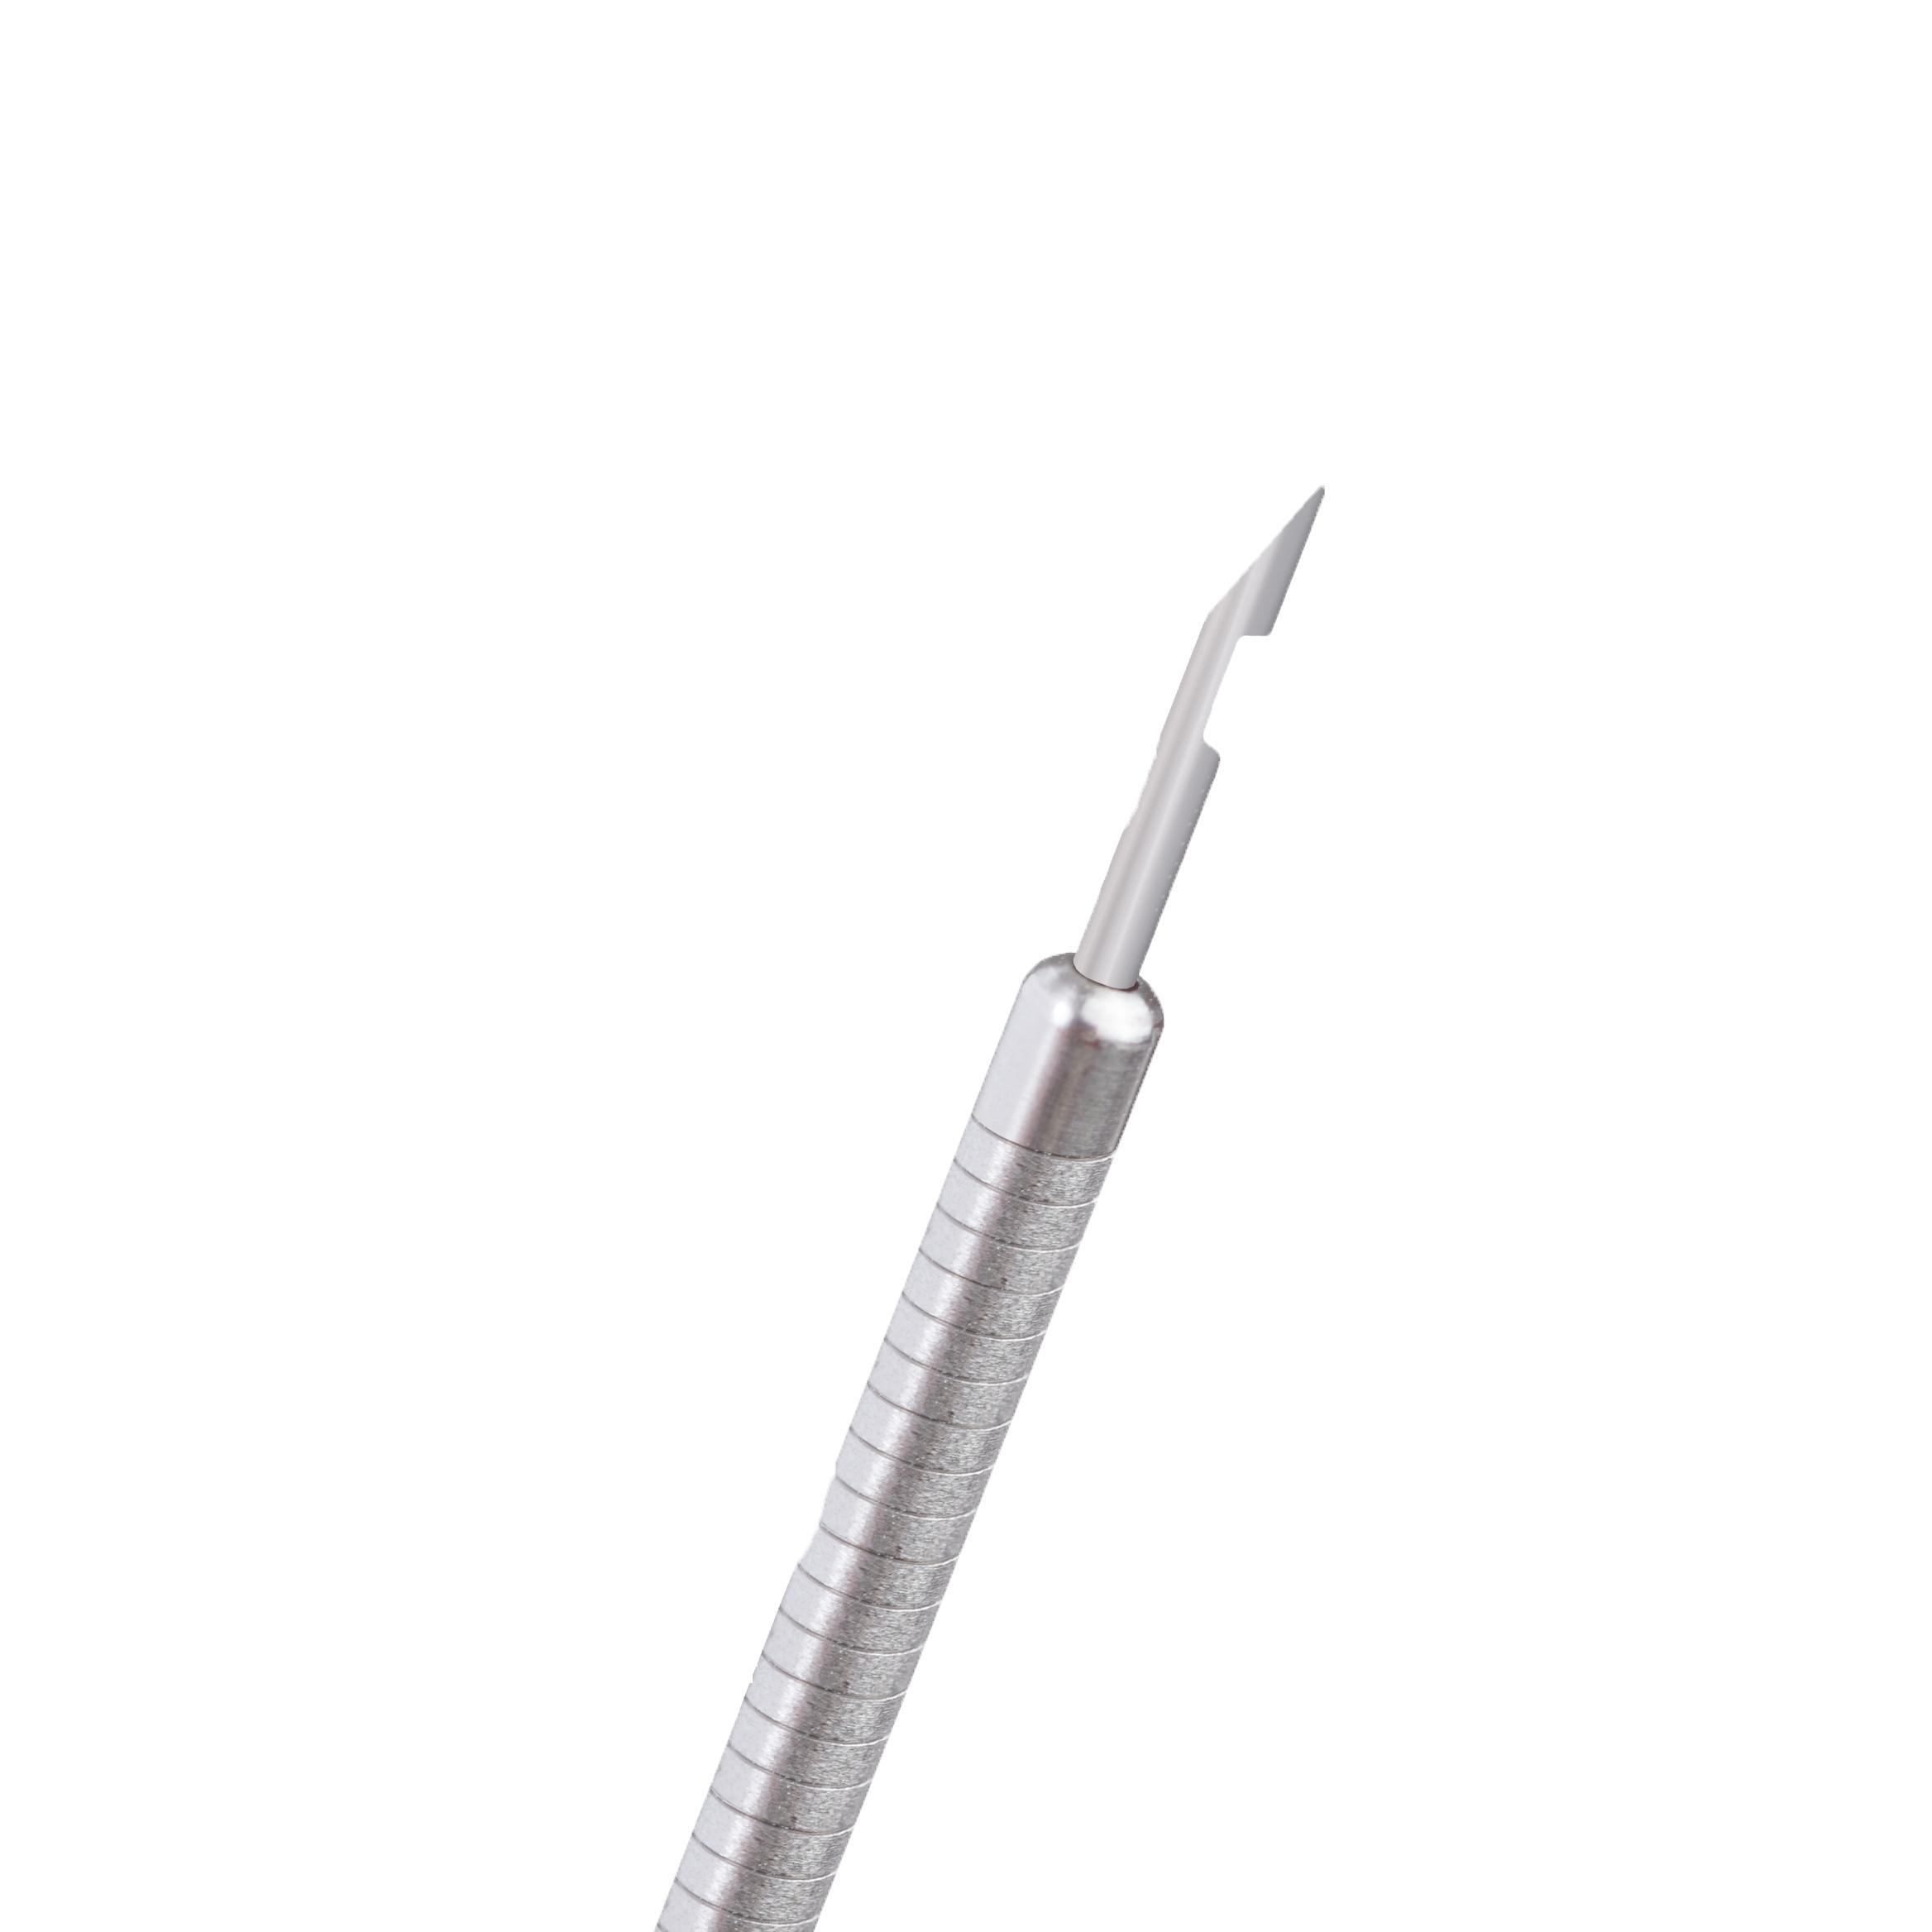 TBNA suction needle bevelled at 15° with side hole